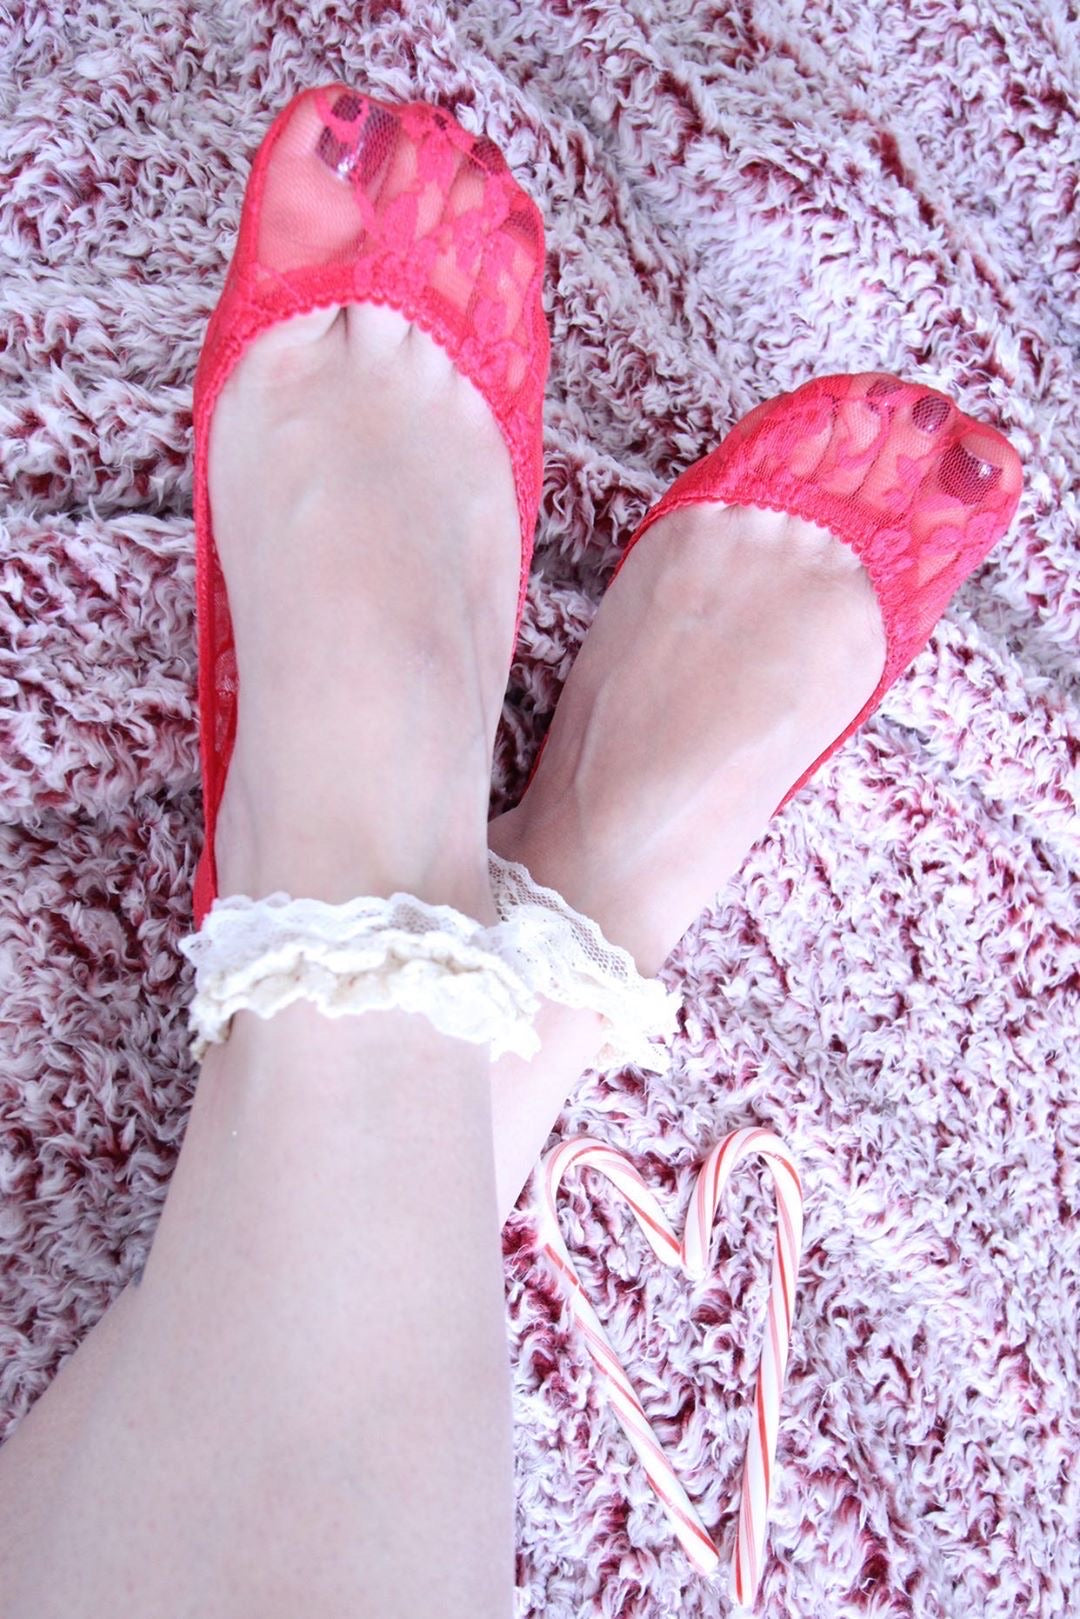 Red Ankle Sheer Socks with antique white Lace - Global Trendz Fashion®